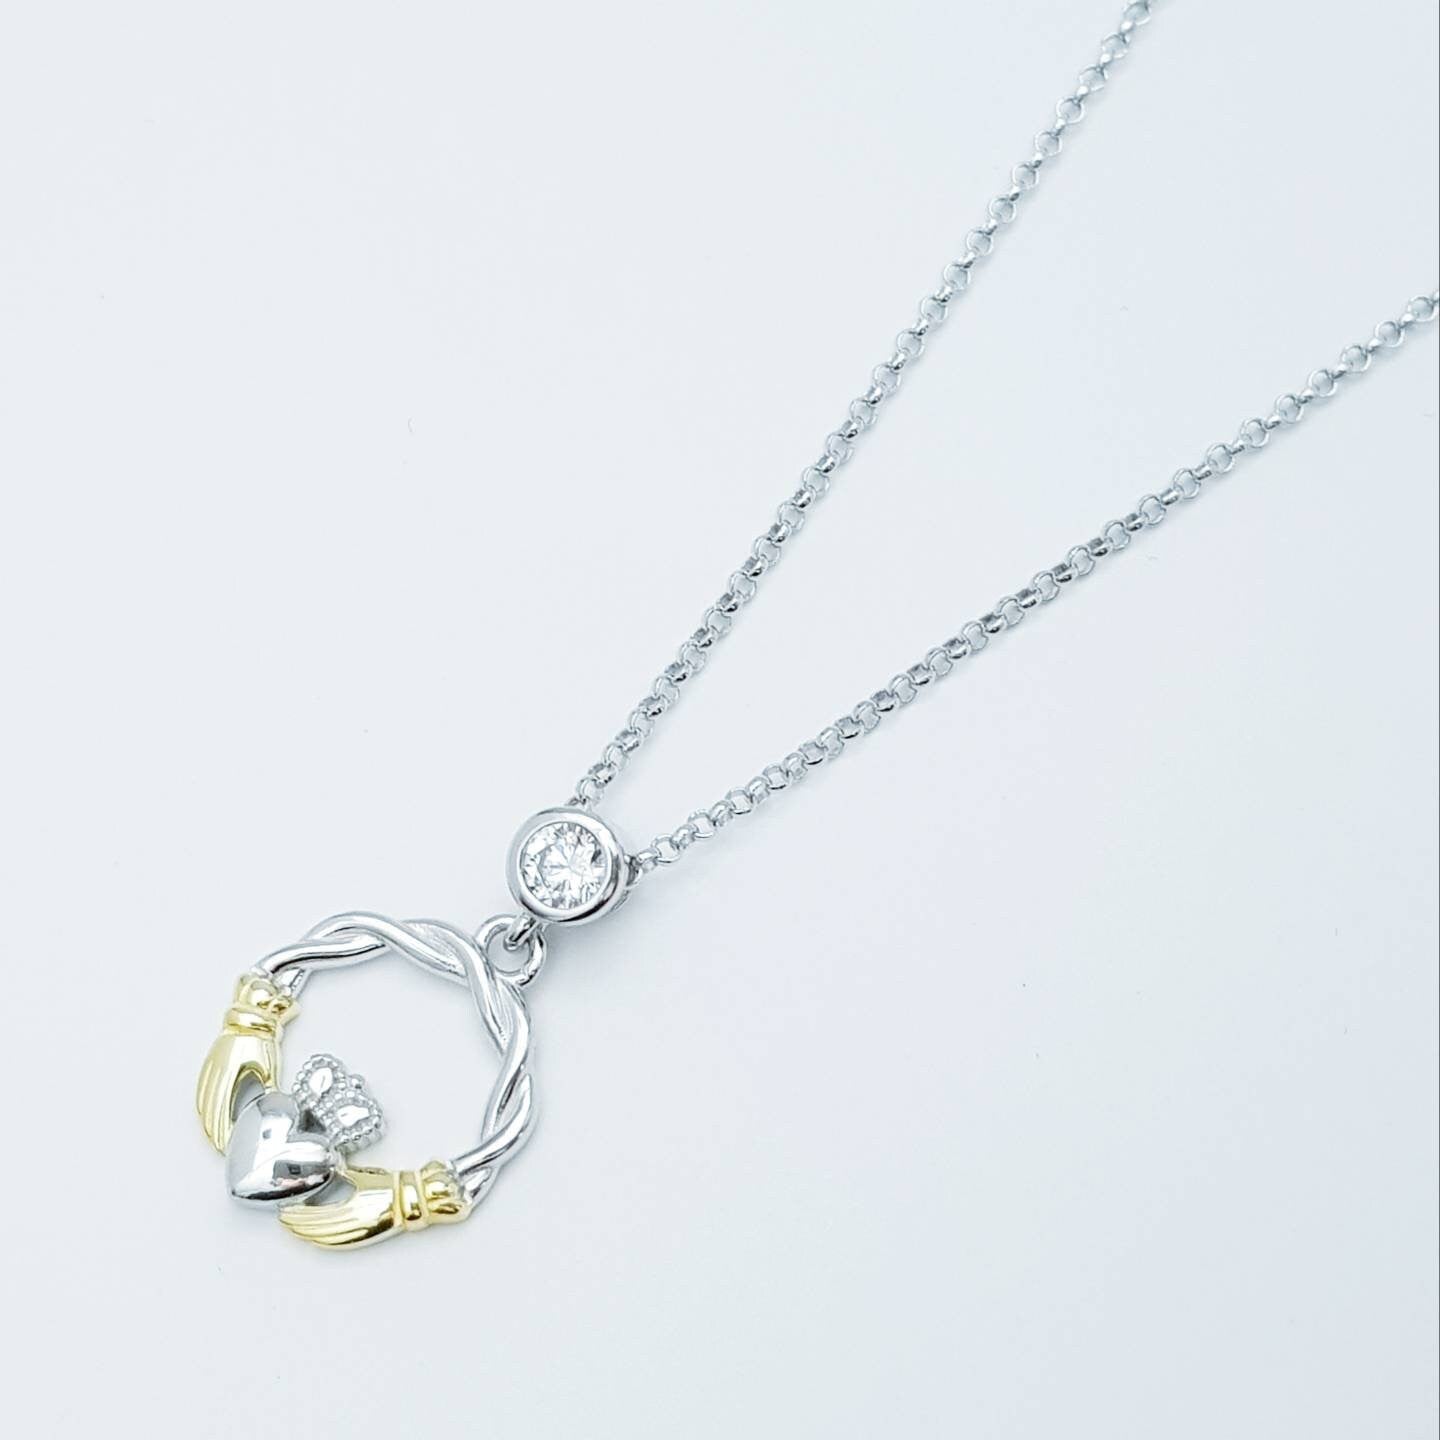 Cute Sterling Silver claddagh necklace with gold plating